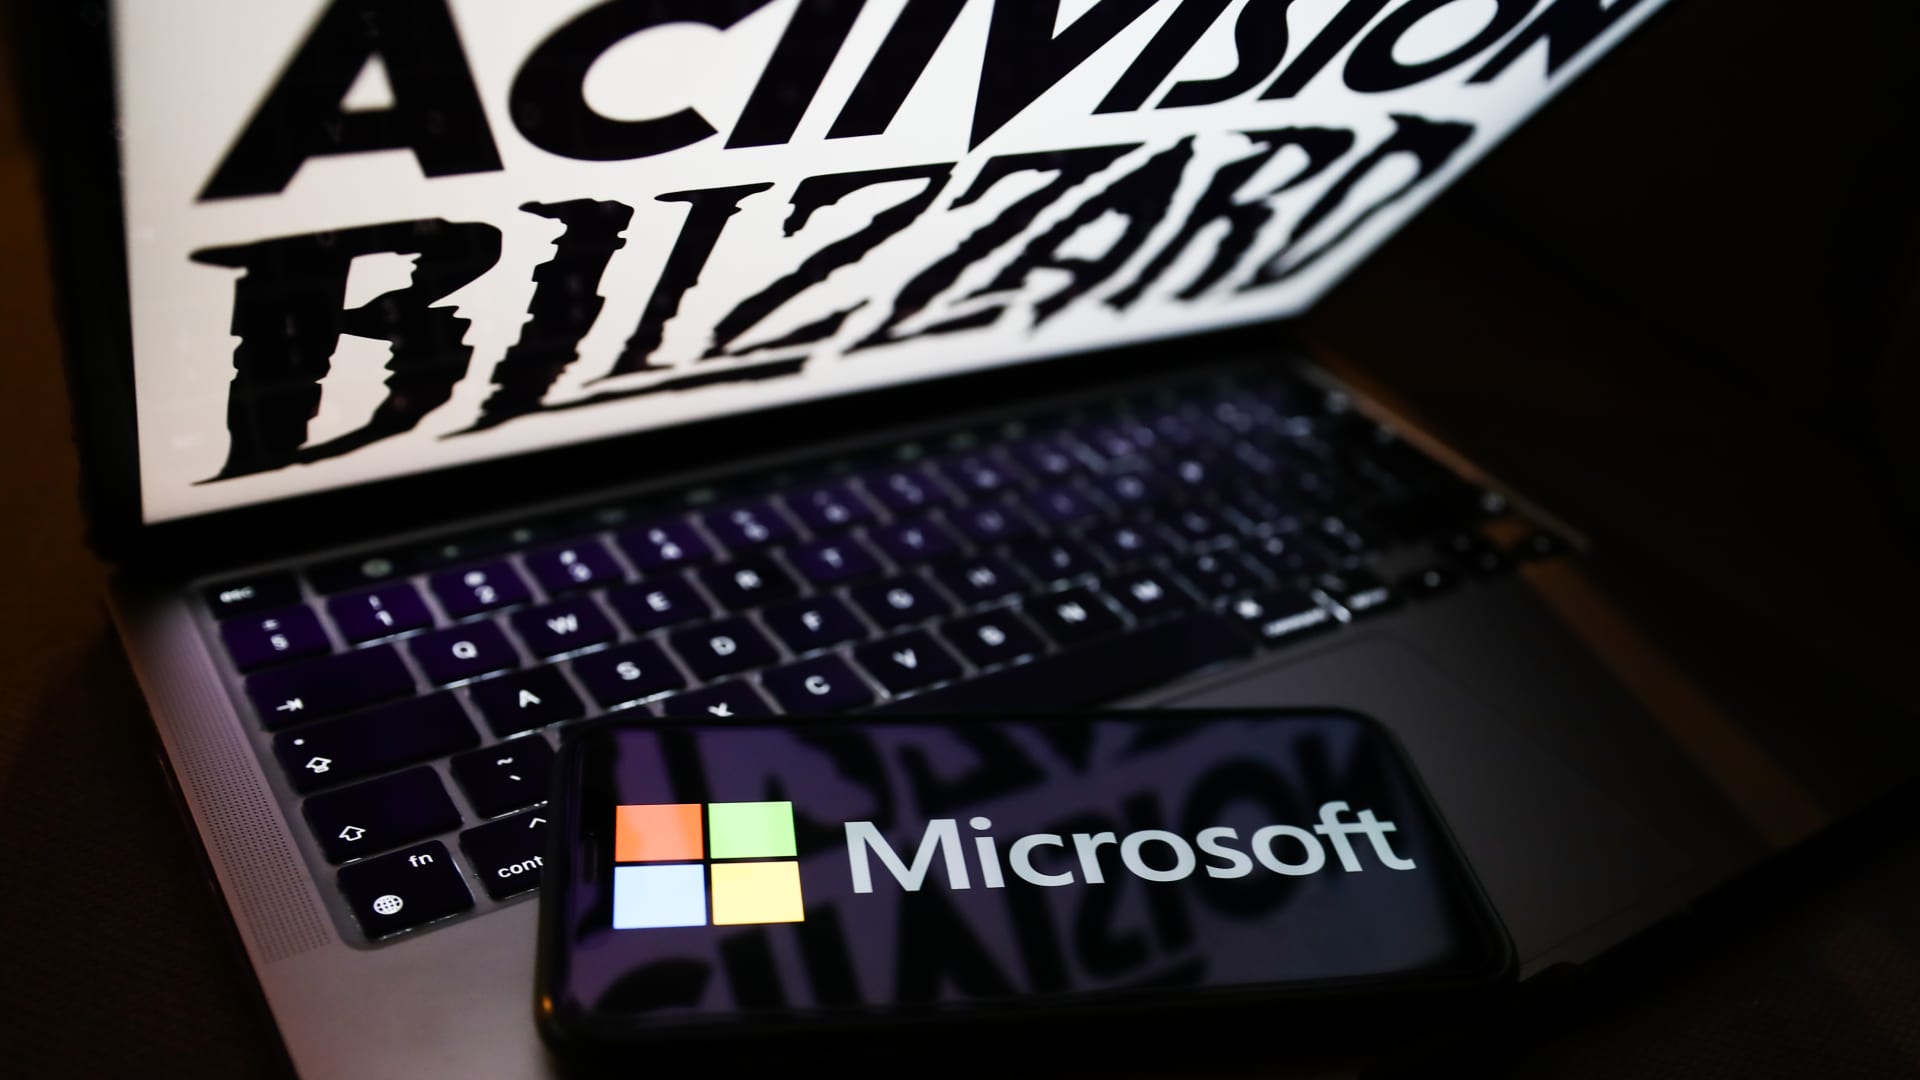 Microsoft's president on fresh bid for Activision Blizzard: 'Up to the regulators' to decide